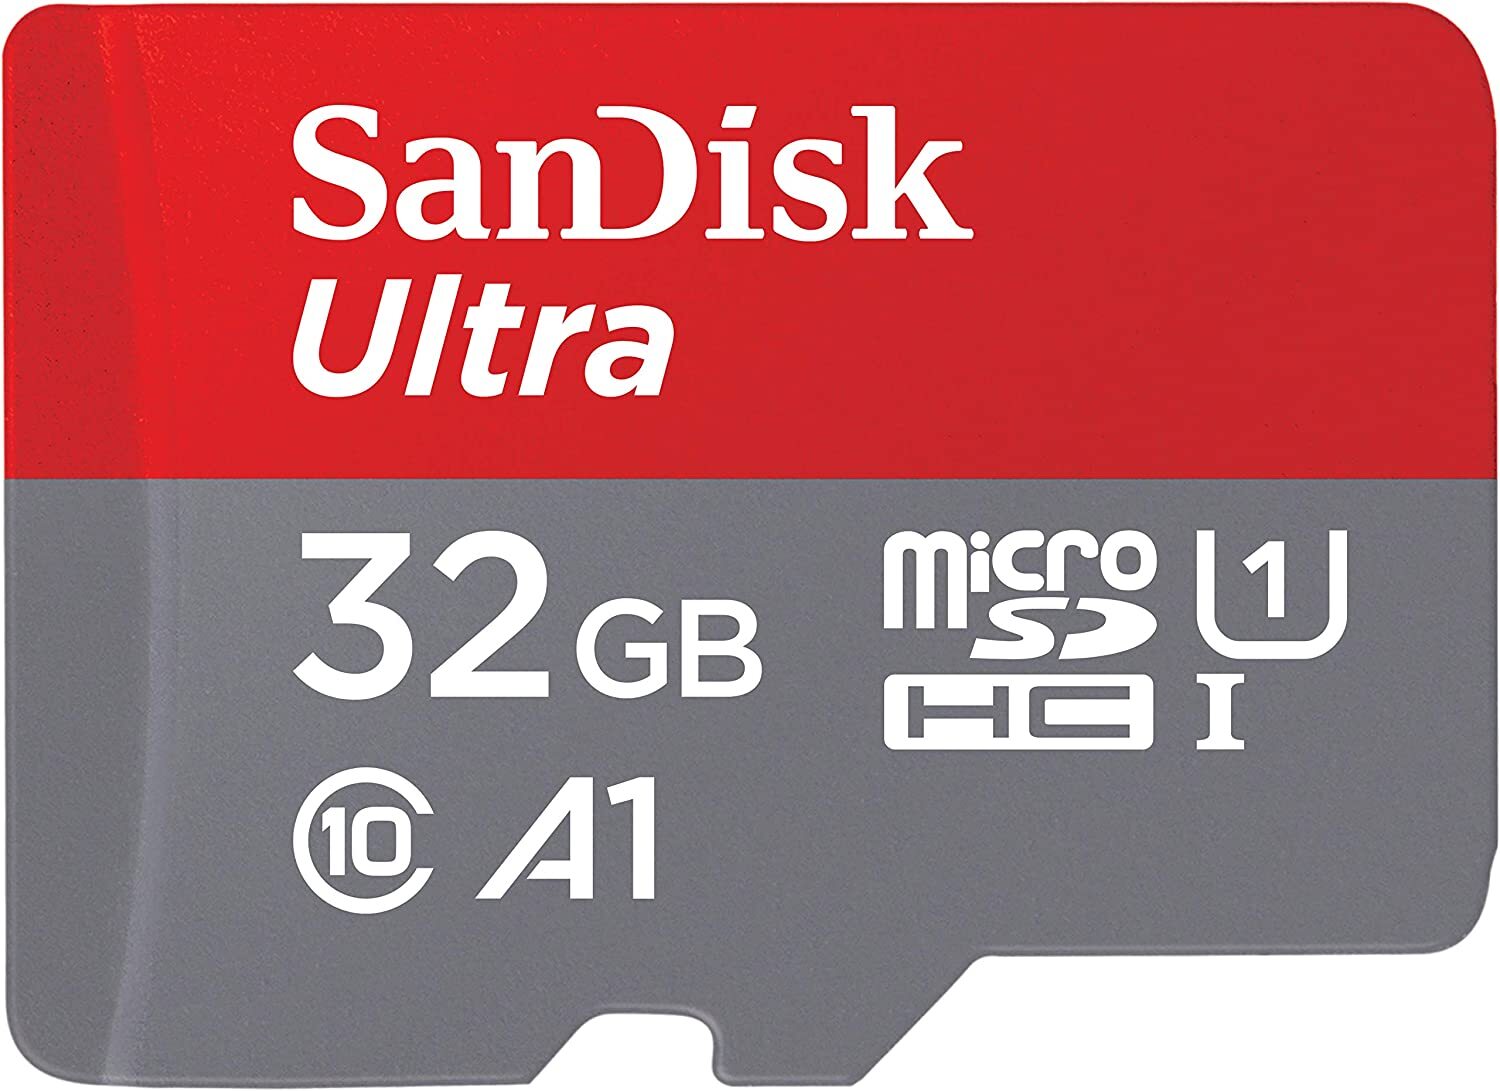 SanDisk Ultra 32GB Micro SD Card SDHC A1 UHS-I 120MB/s Mobile Phone TF Memory Card SDSQUA4-032G